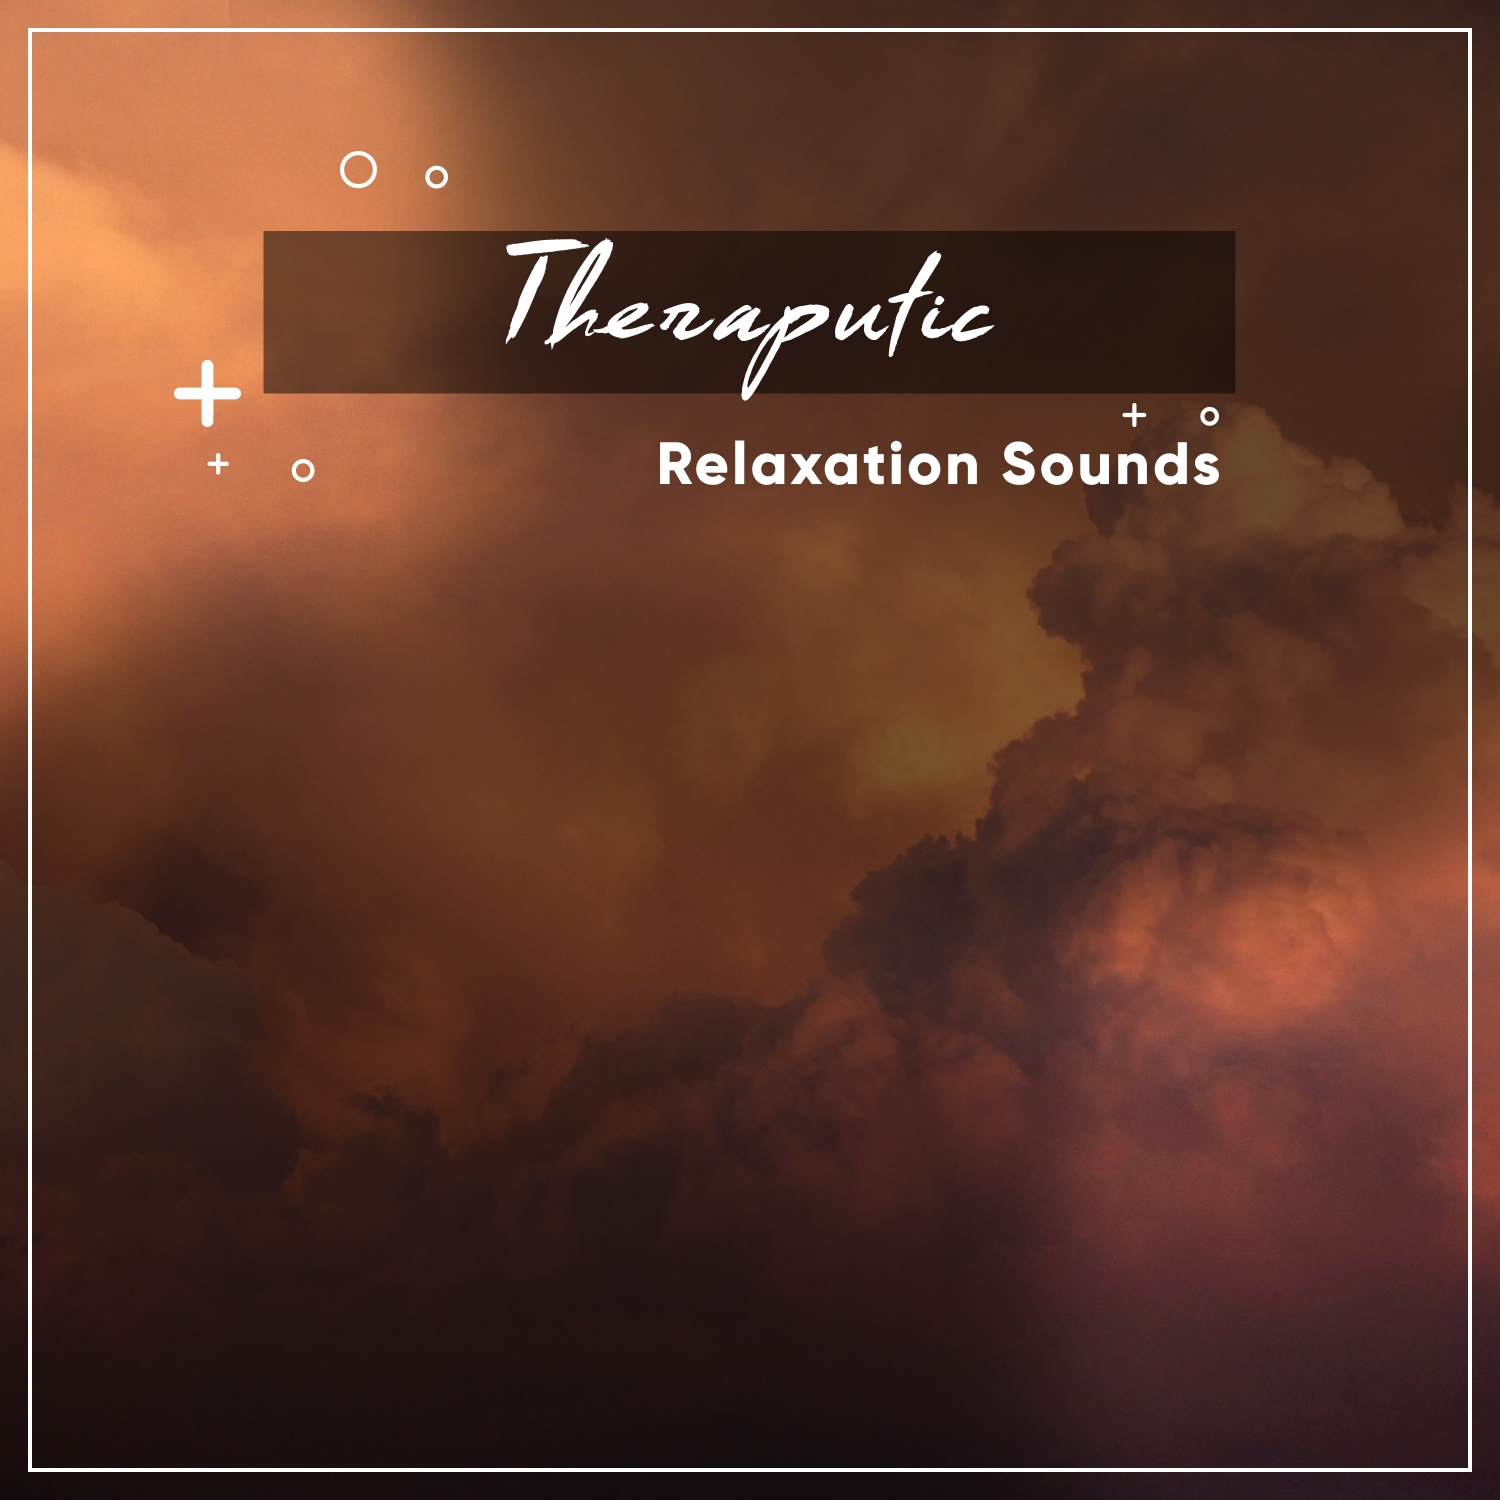 16 Therapeutic Sounds For Relaxation